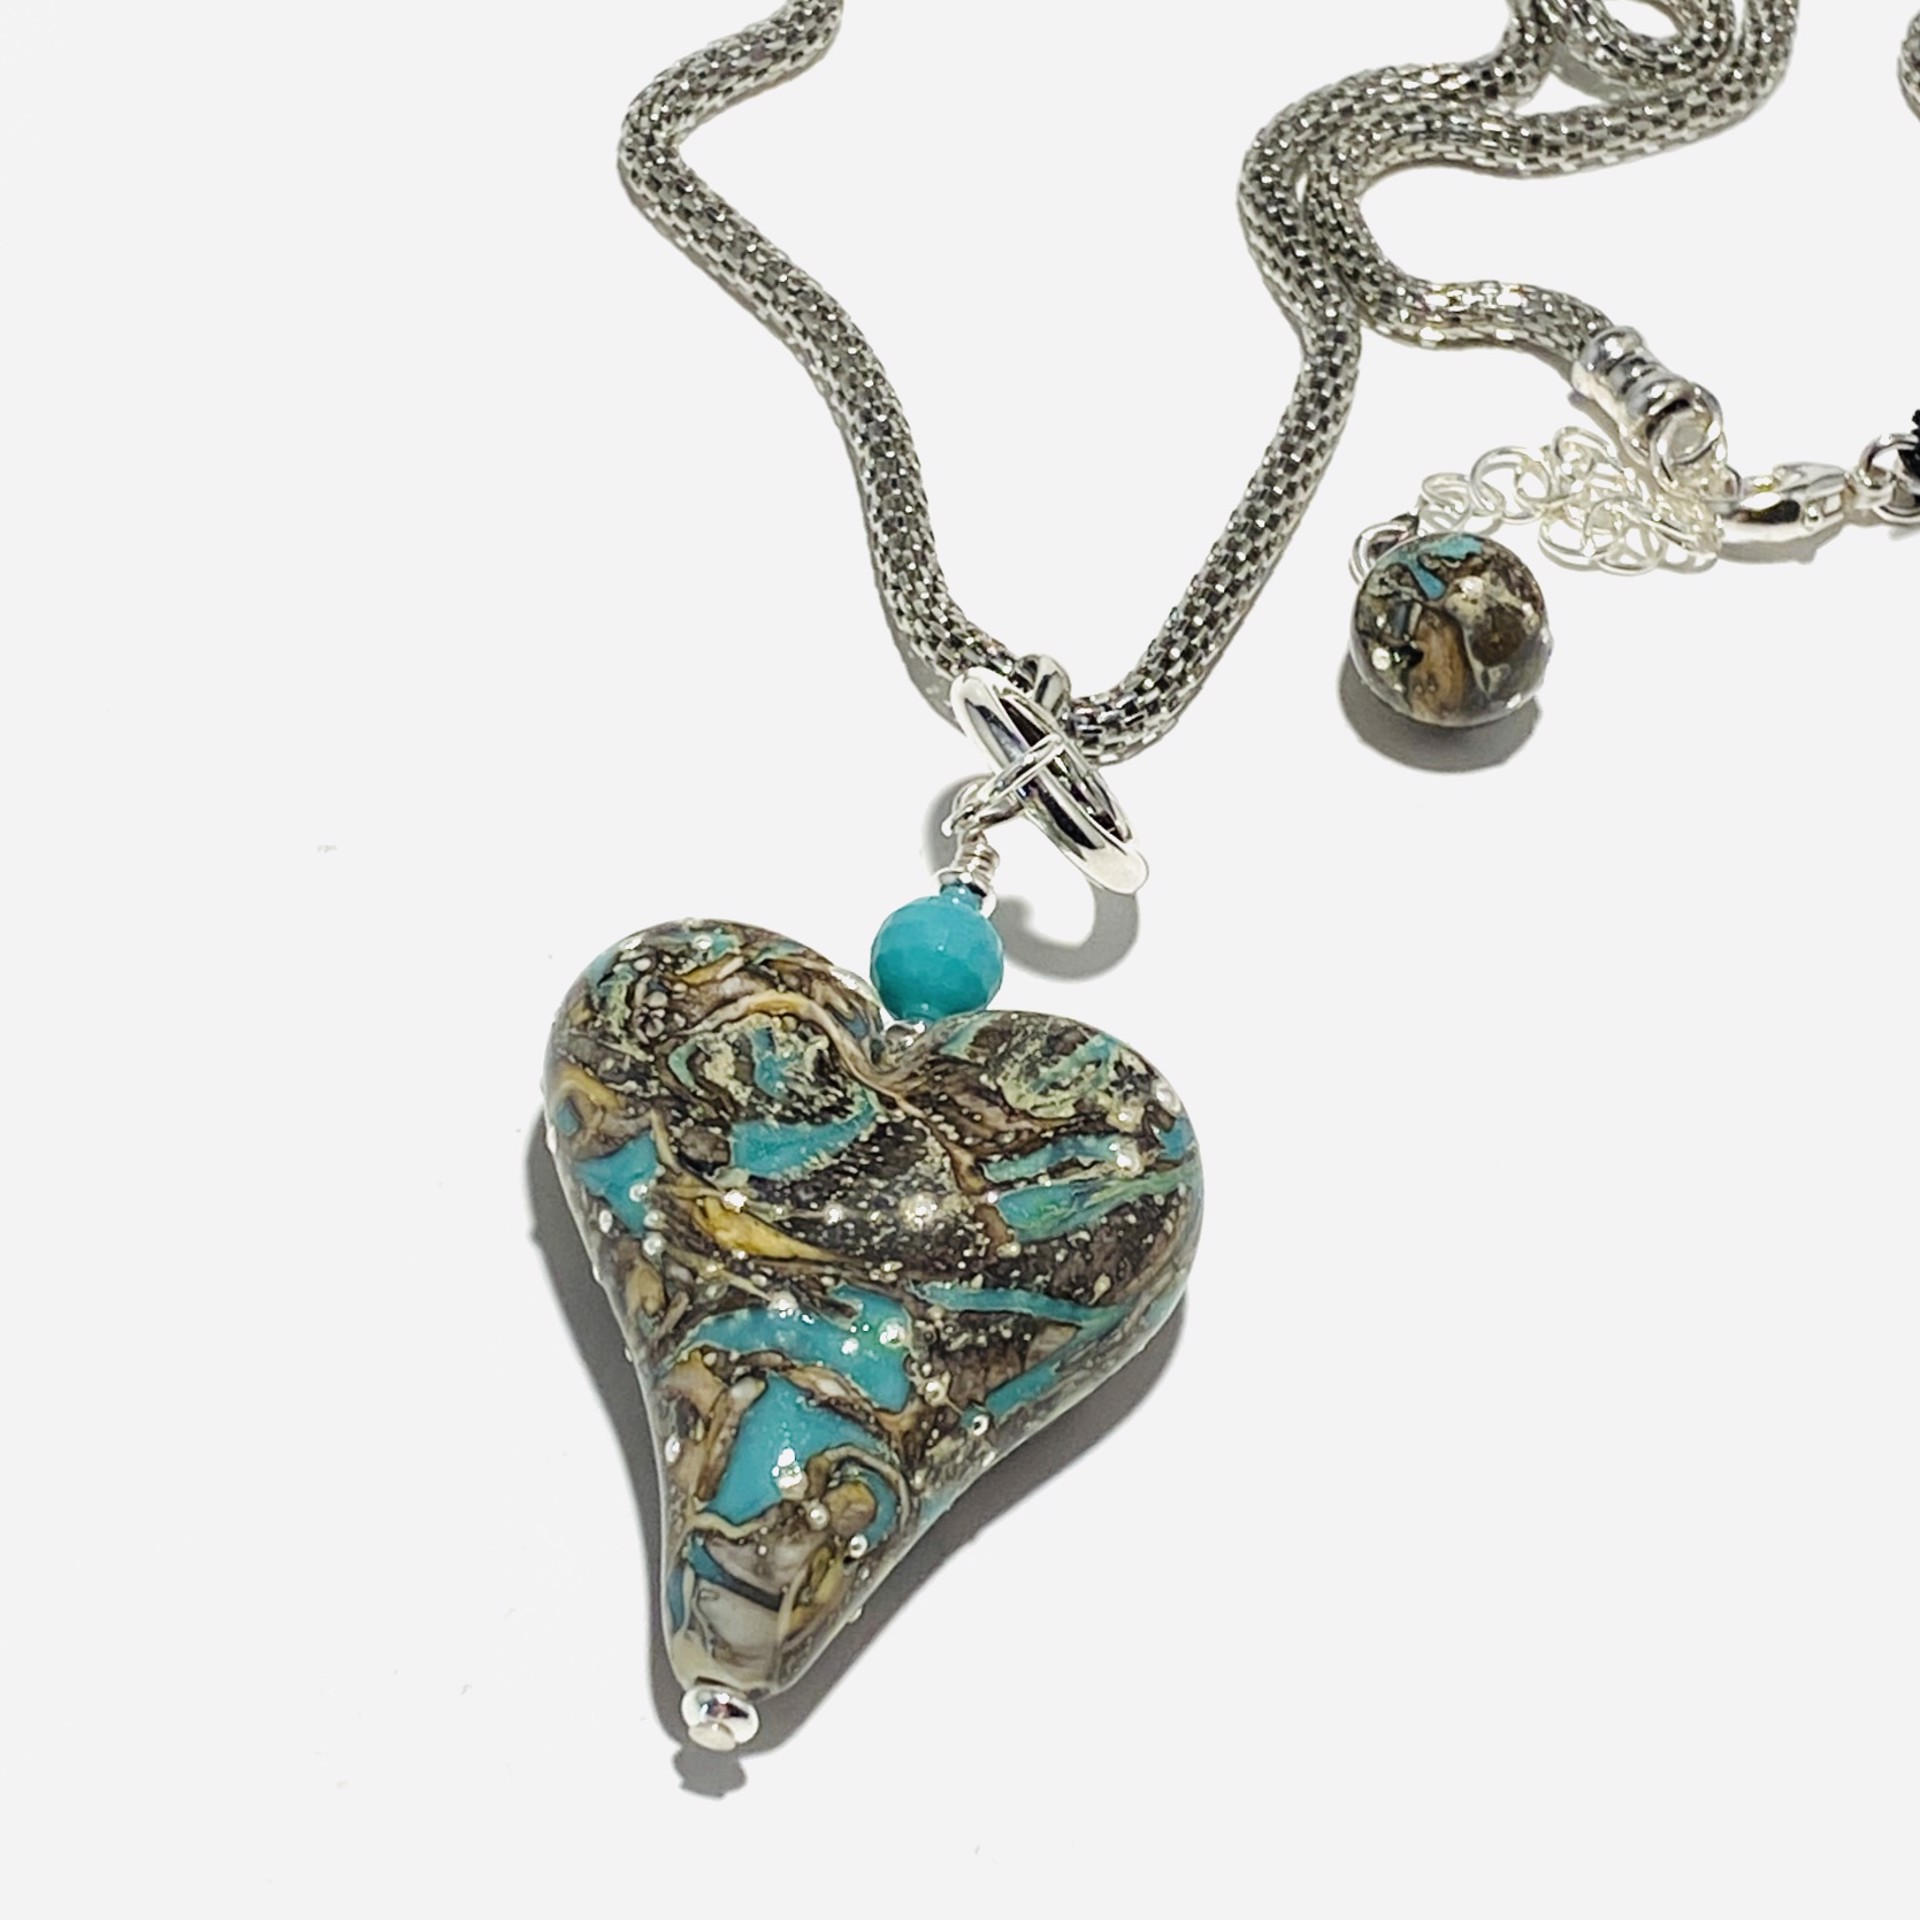 Silver Leaf Shards Turquoise Heart on Charm Bail Silver Mesh Chain Necklace LS23-2A by Linda Sacra